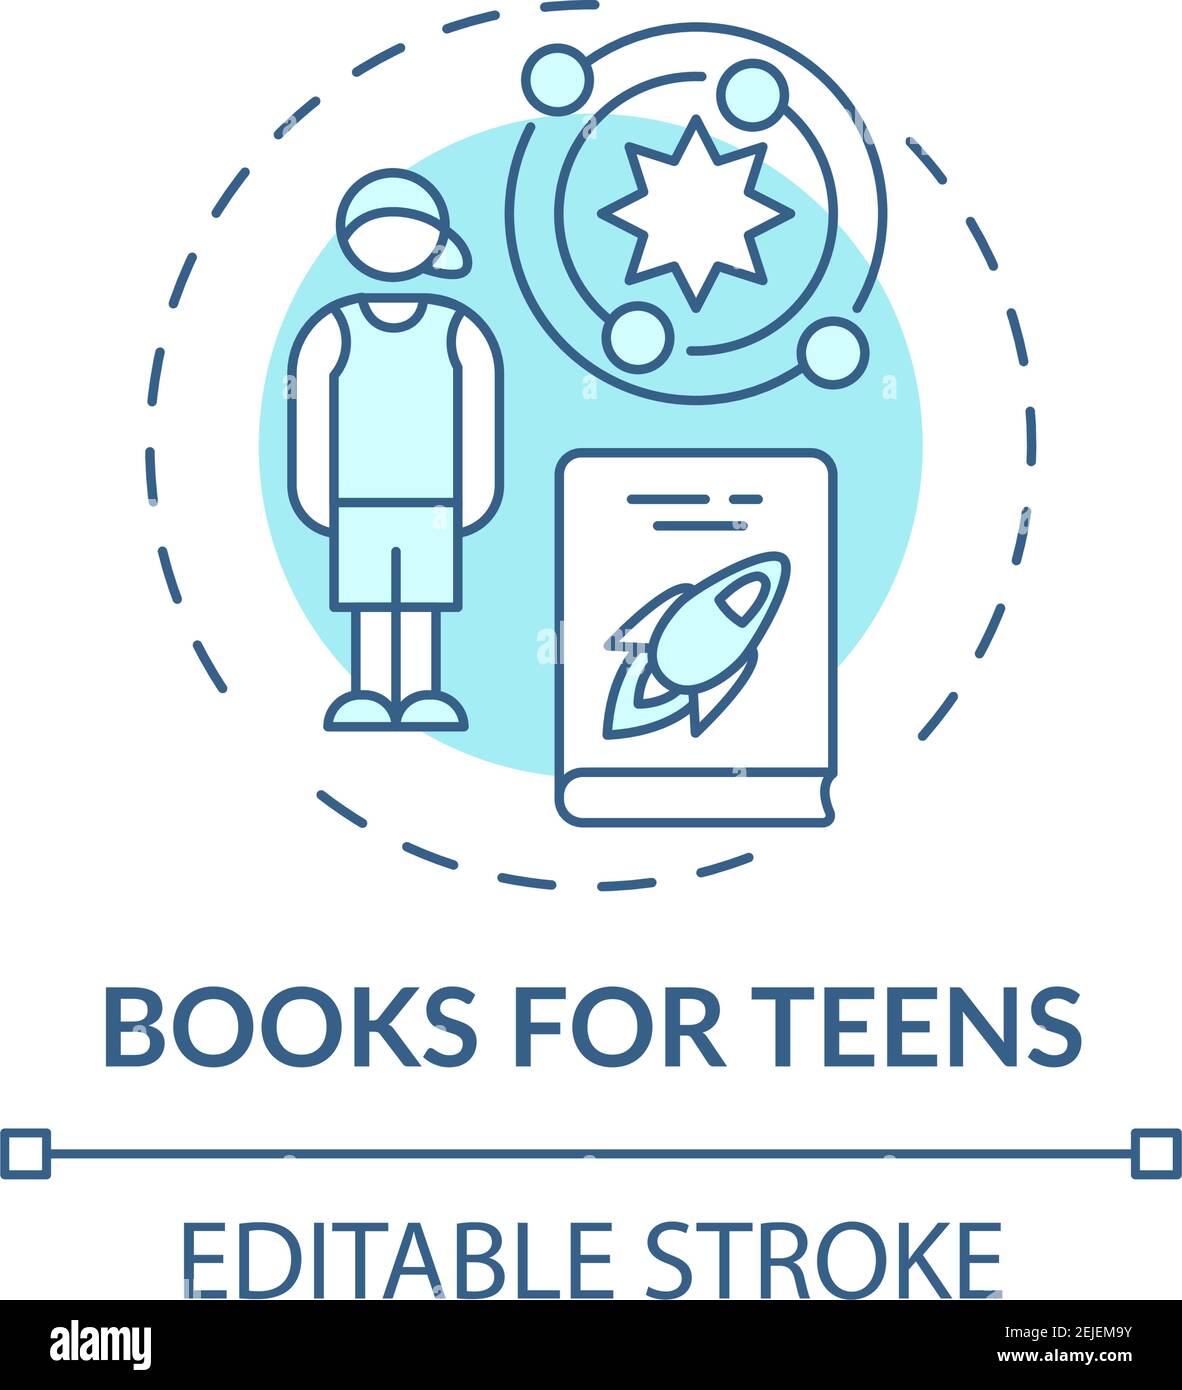 Books for teens concept icon Stock Vector